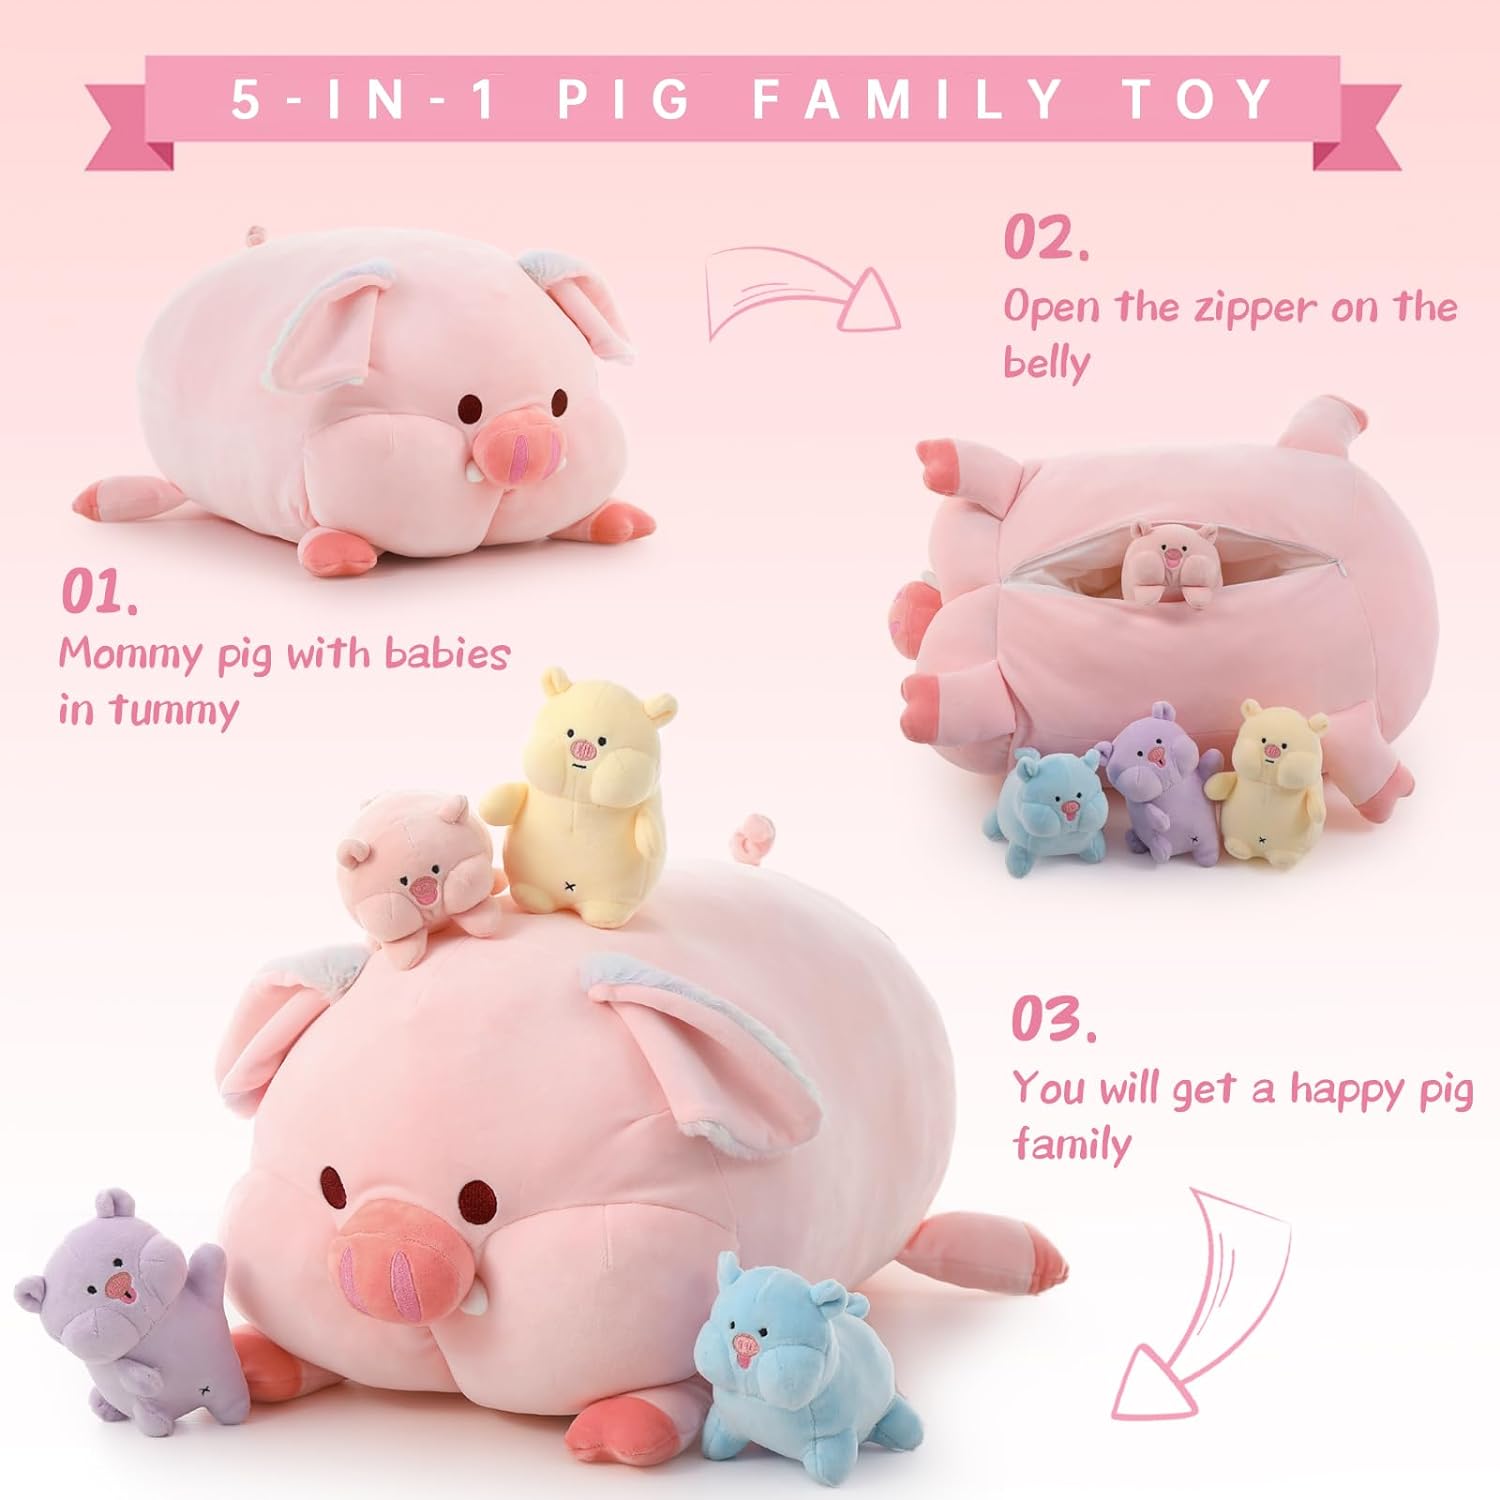 Honoson Nurturing Pig Stuffed Animal with Babies, Soft Cuddly Piggy Plush  Set for Toddlers Plushy Nursing Mommy Pig with 4 Stuffed Magnetic Baby